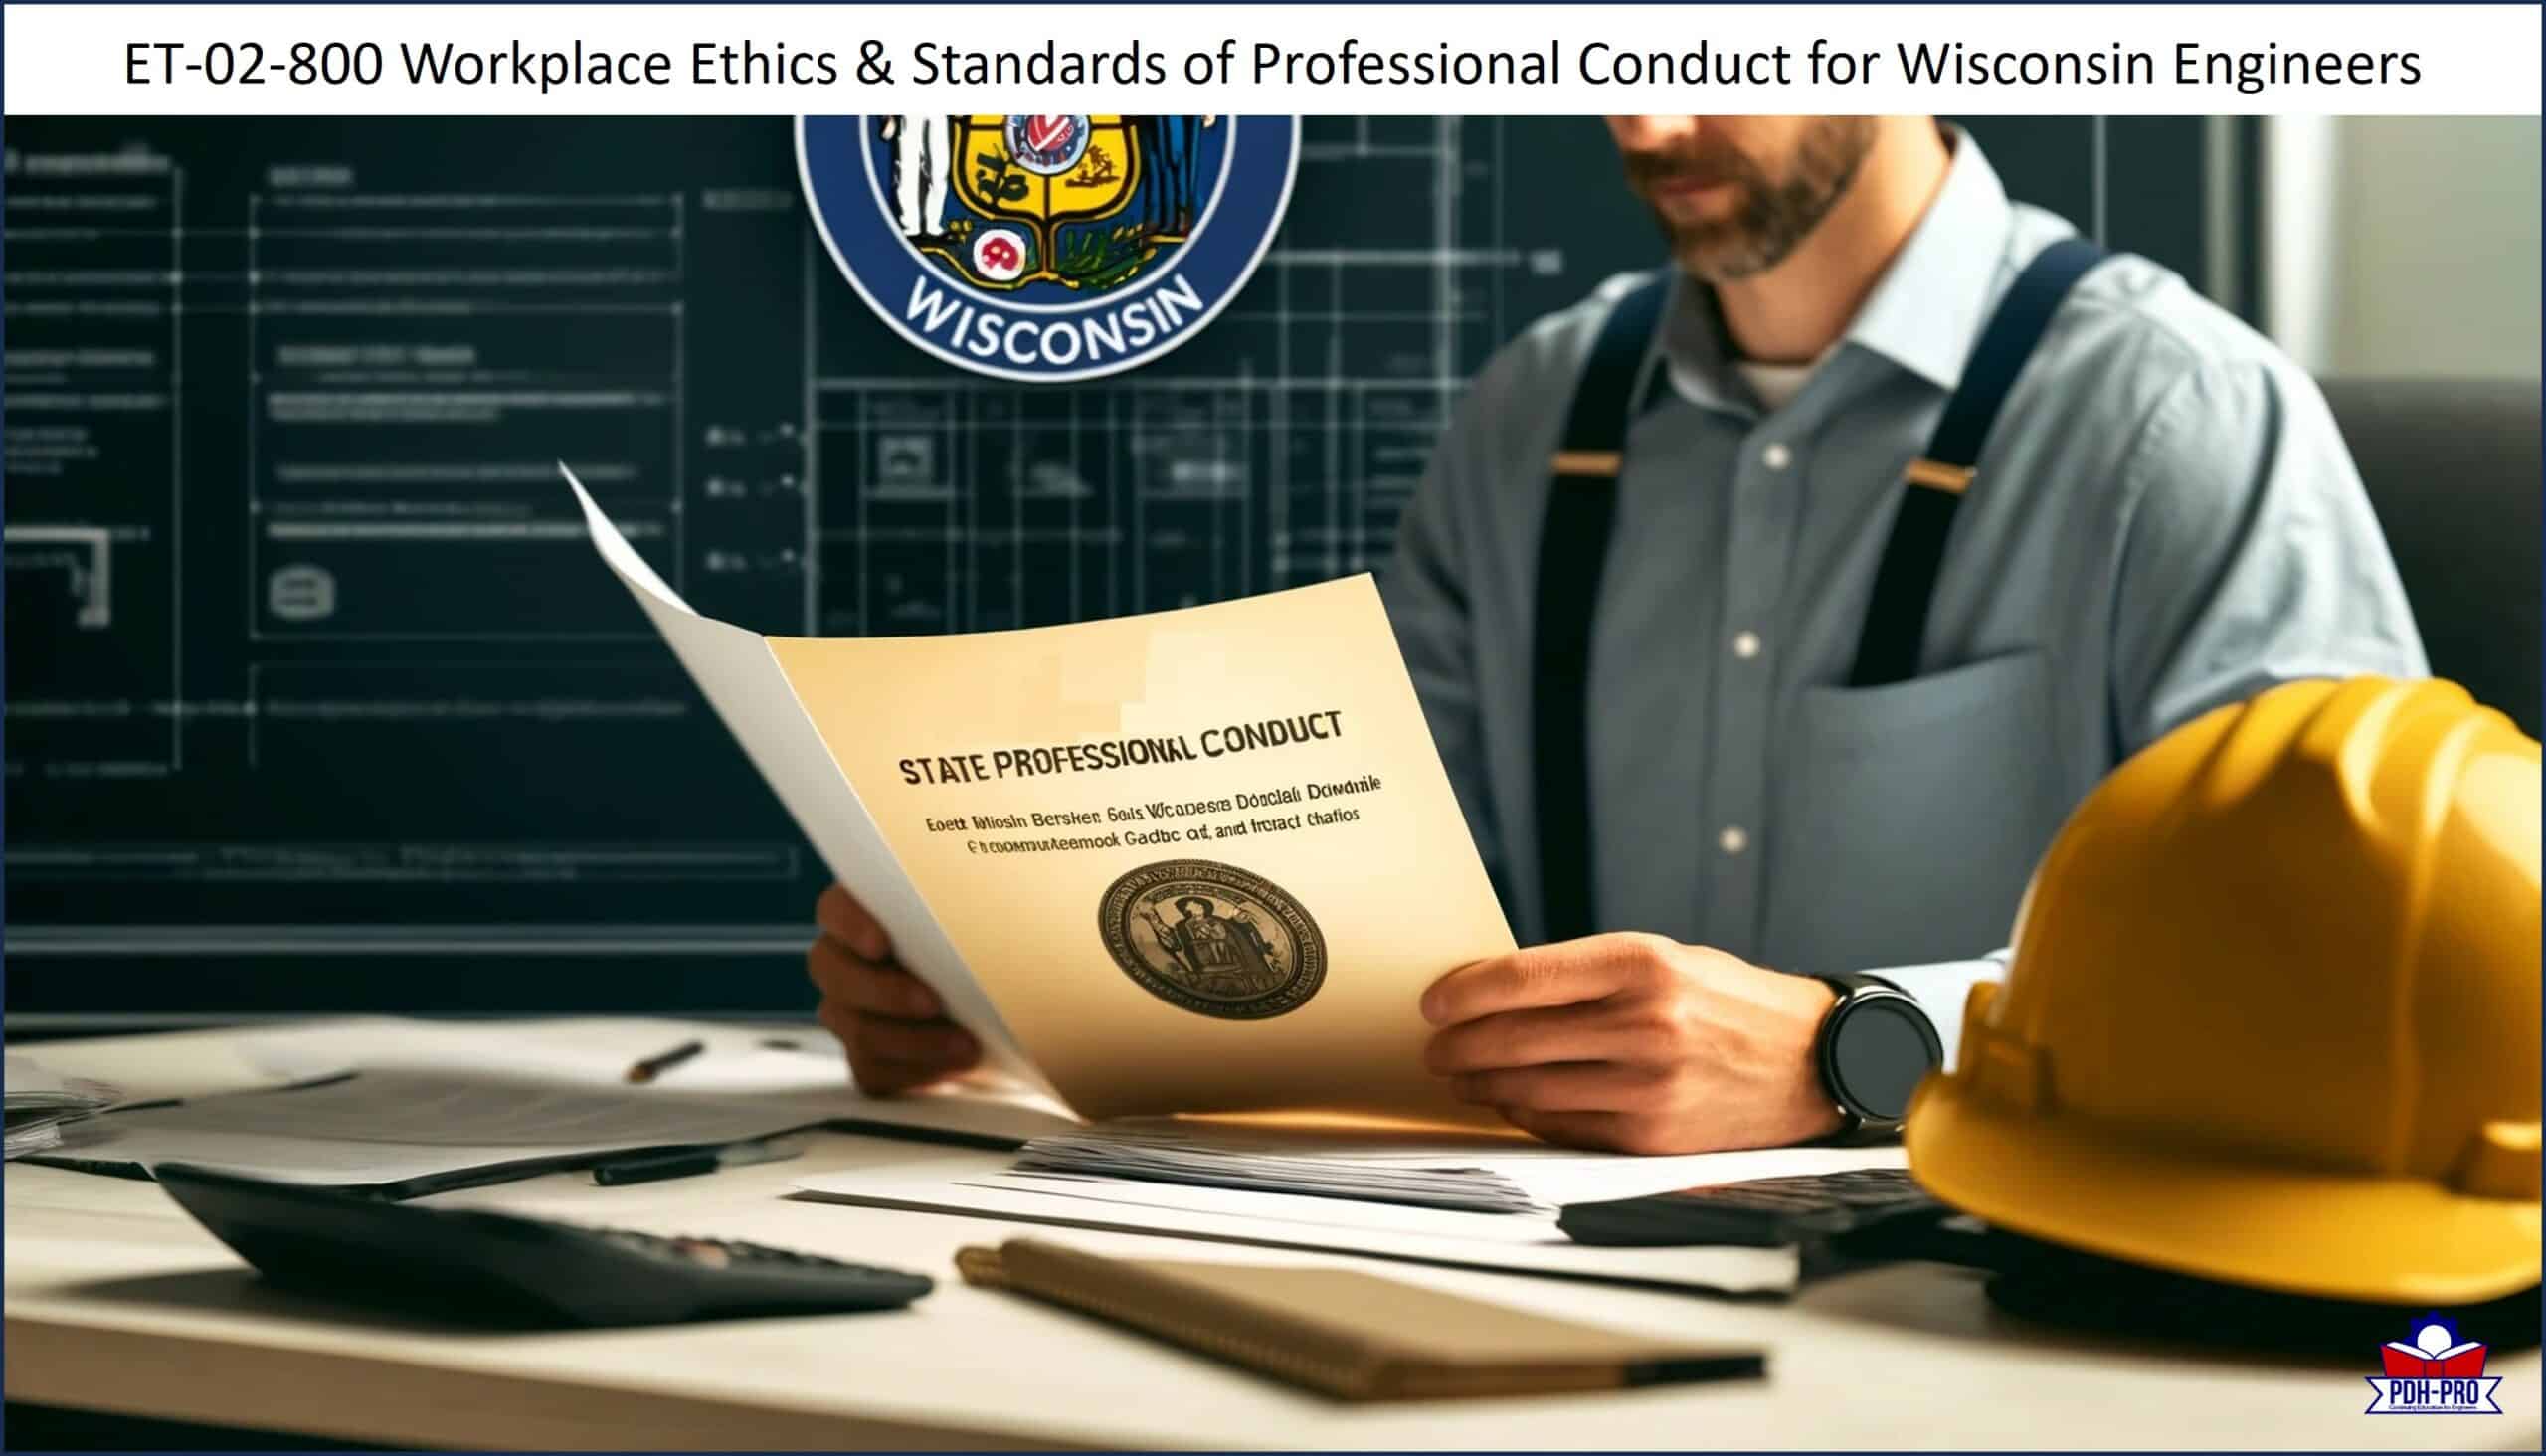 Workplace Ethics & Standards of Professional Conduct for Wisconsin Engineers